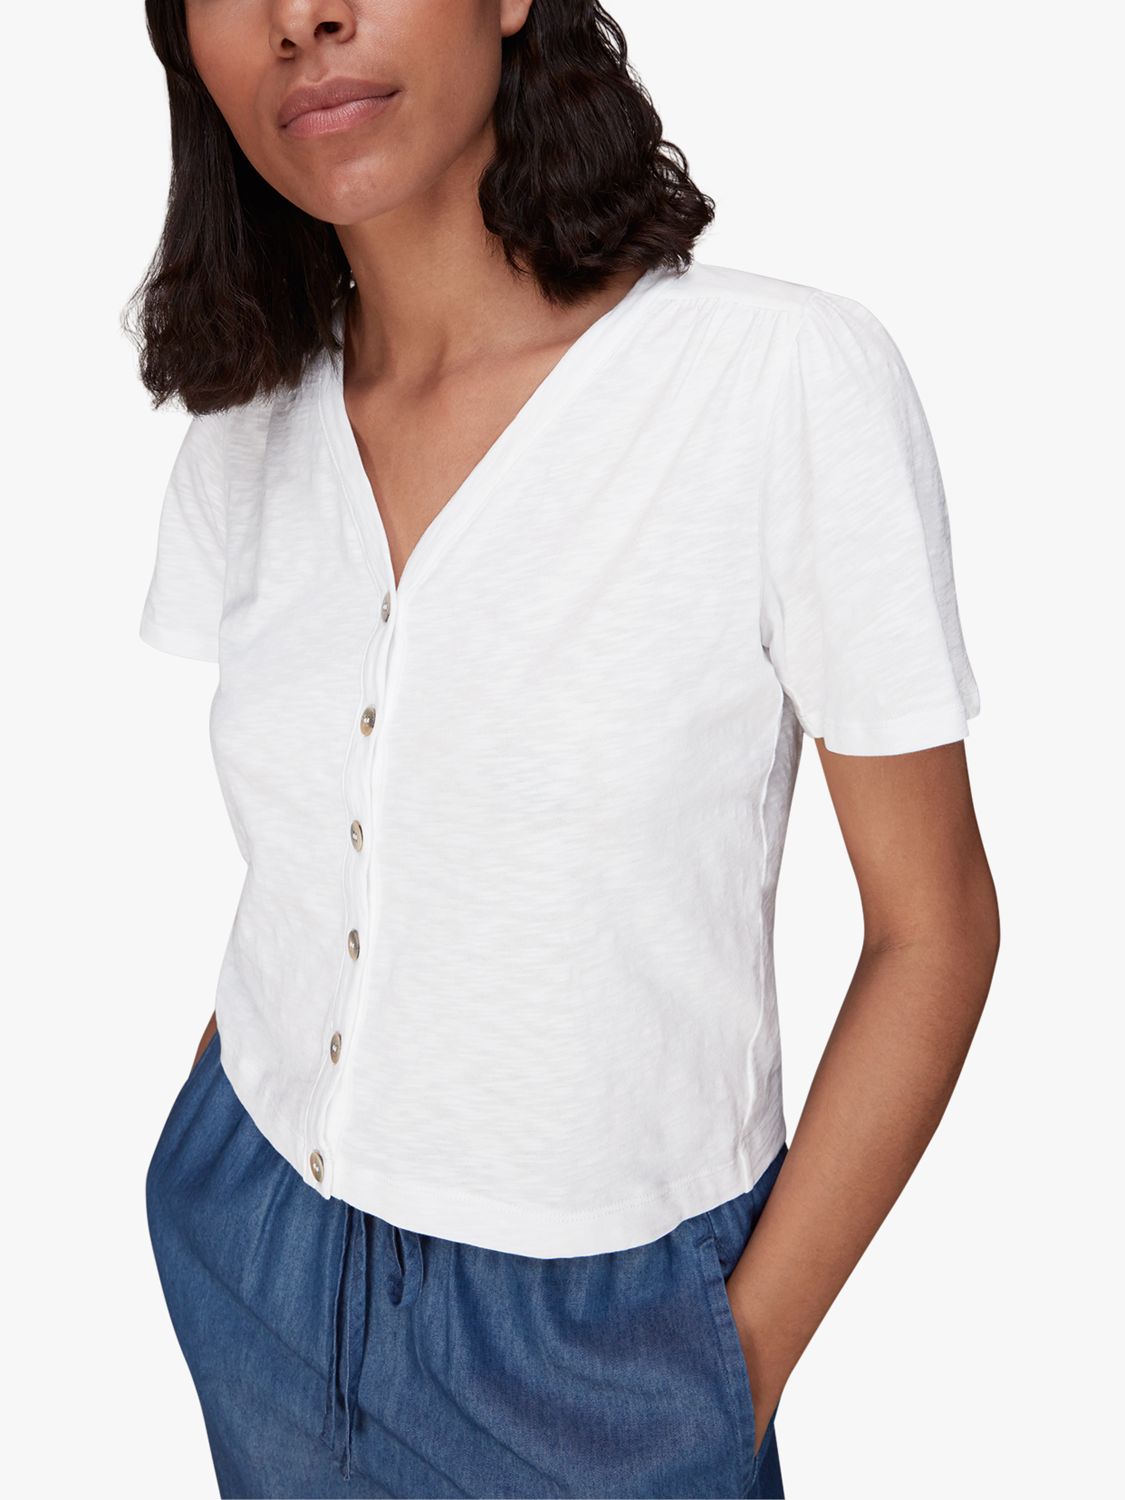 Whistles Maeve V-Neck Button Front Top, White, M